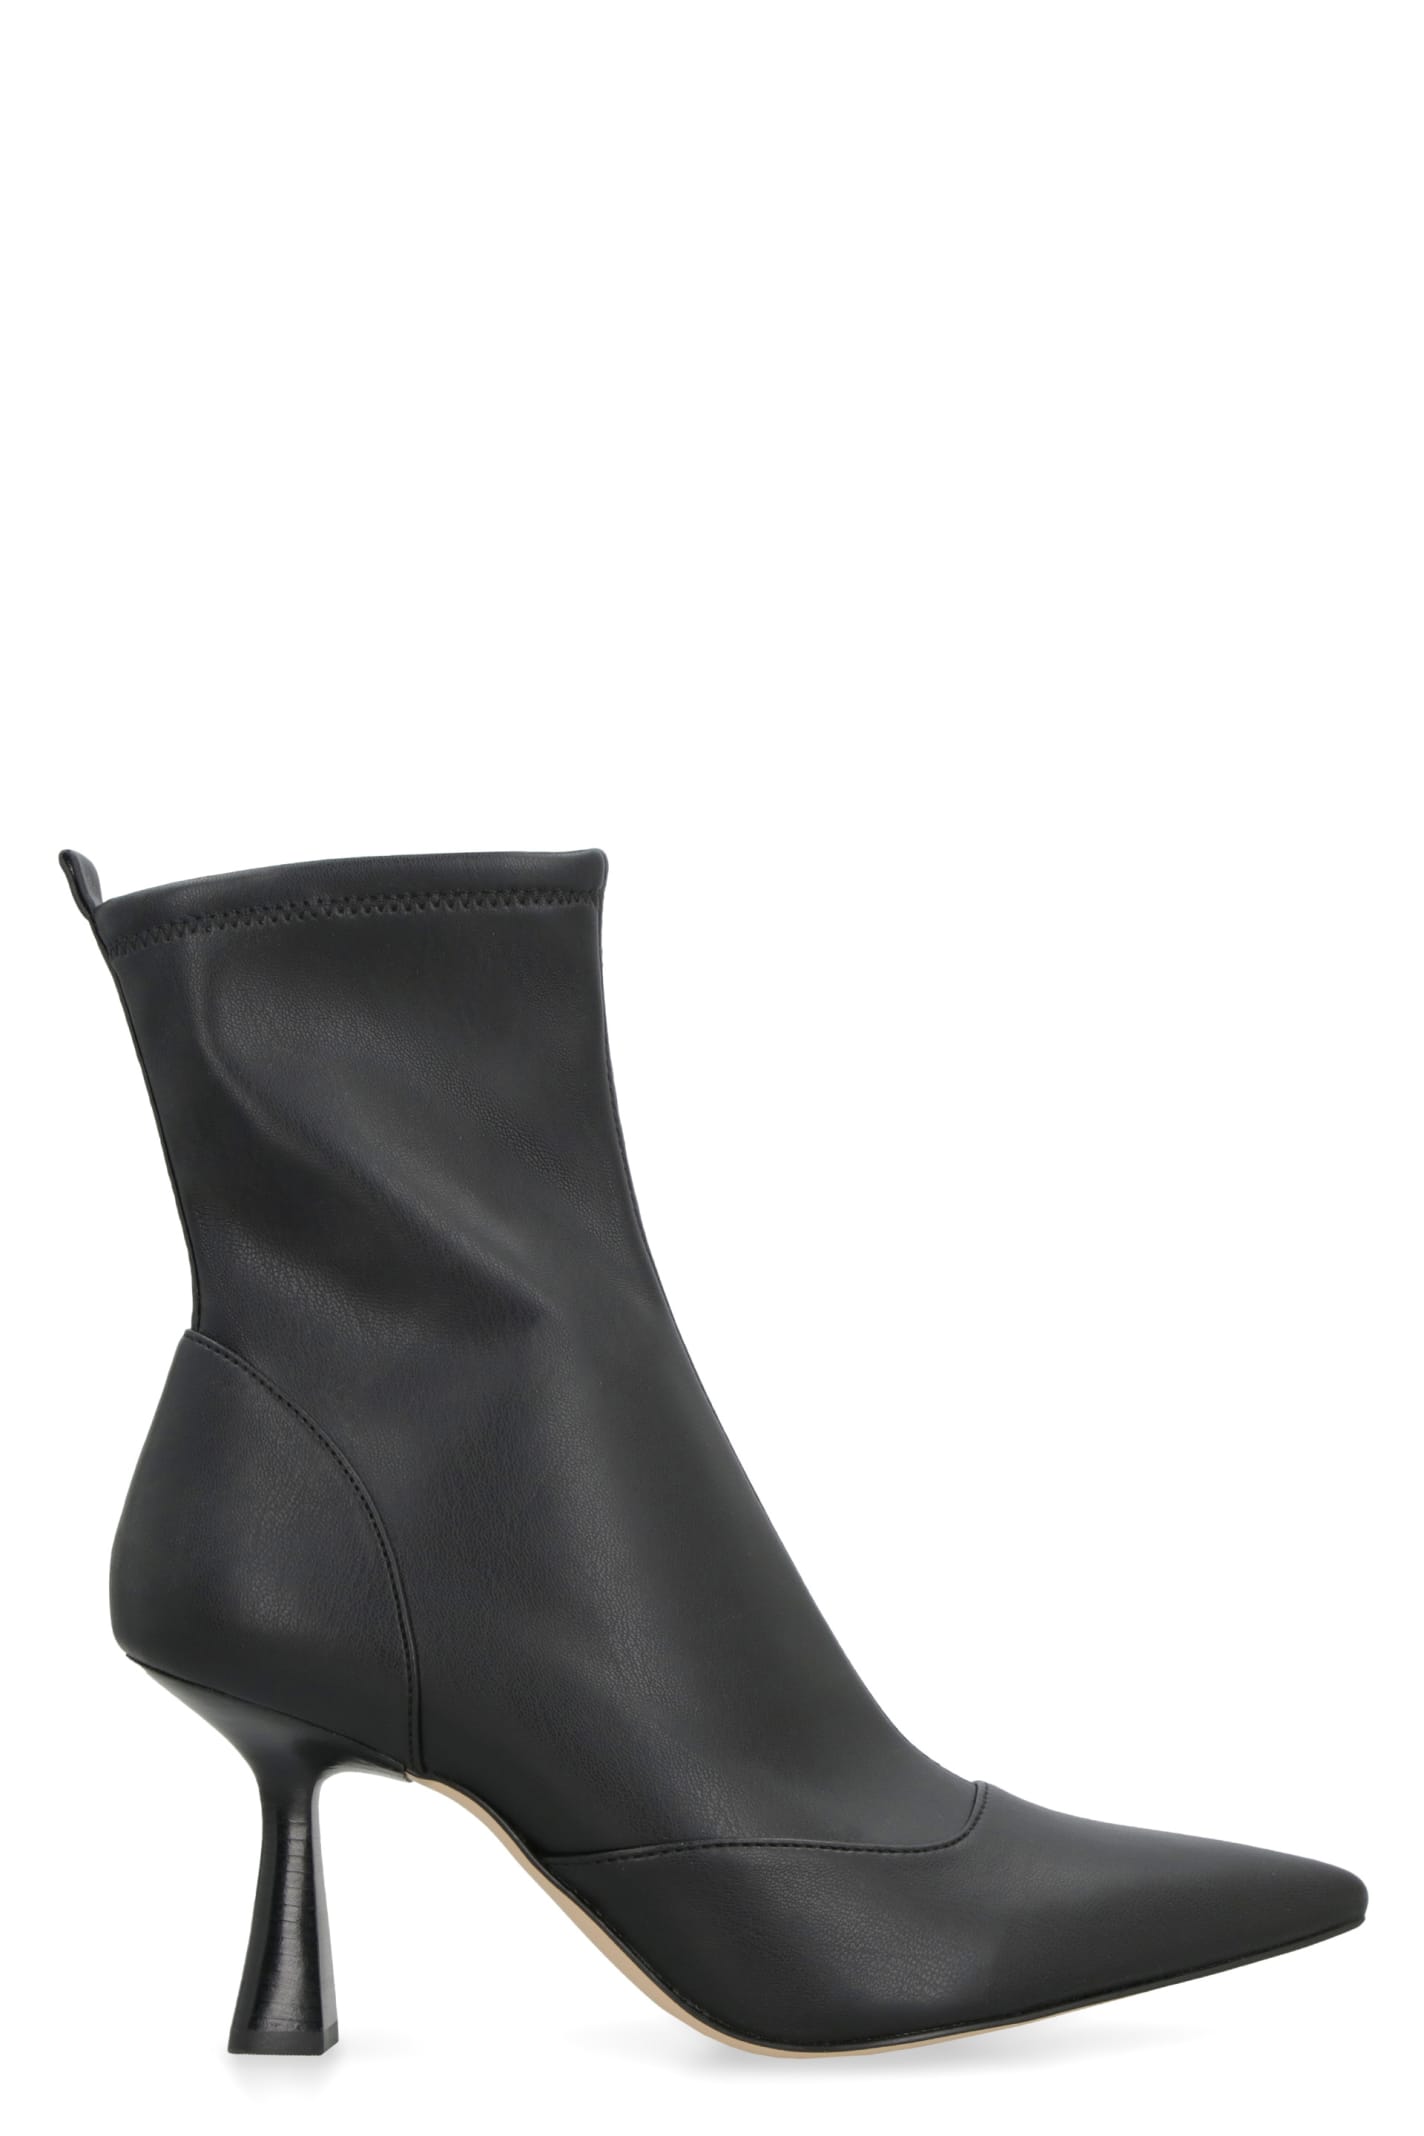 Michael Kors Clara Faux Leather Ankle Boots In Black